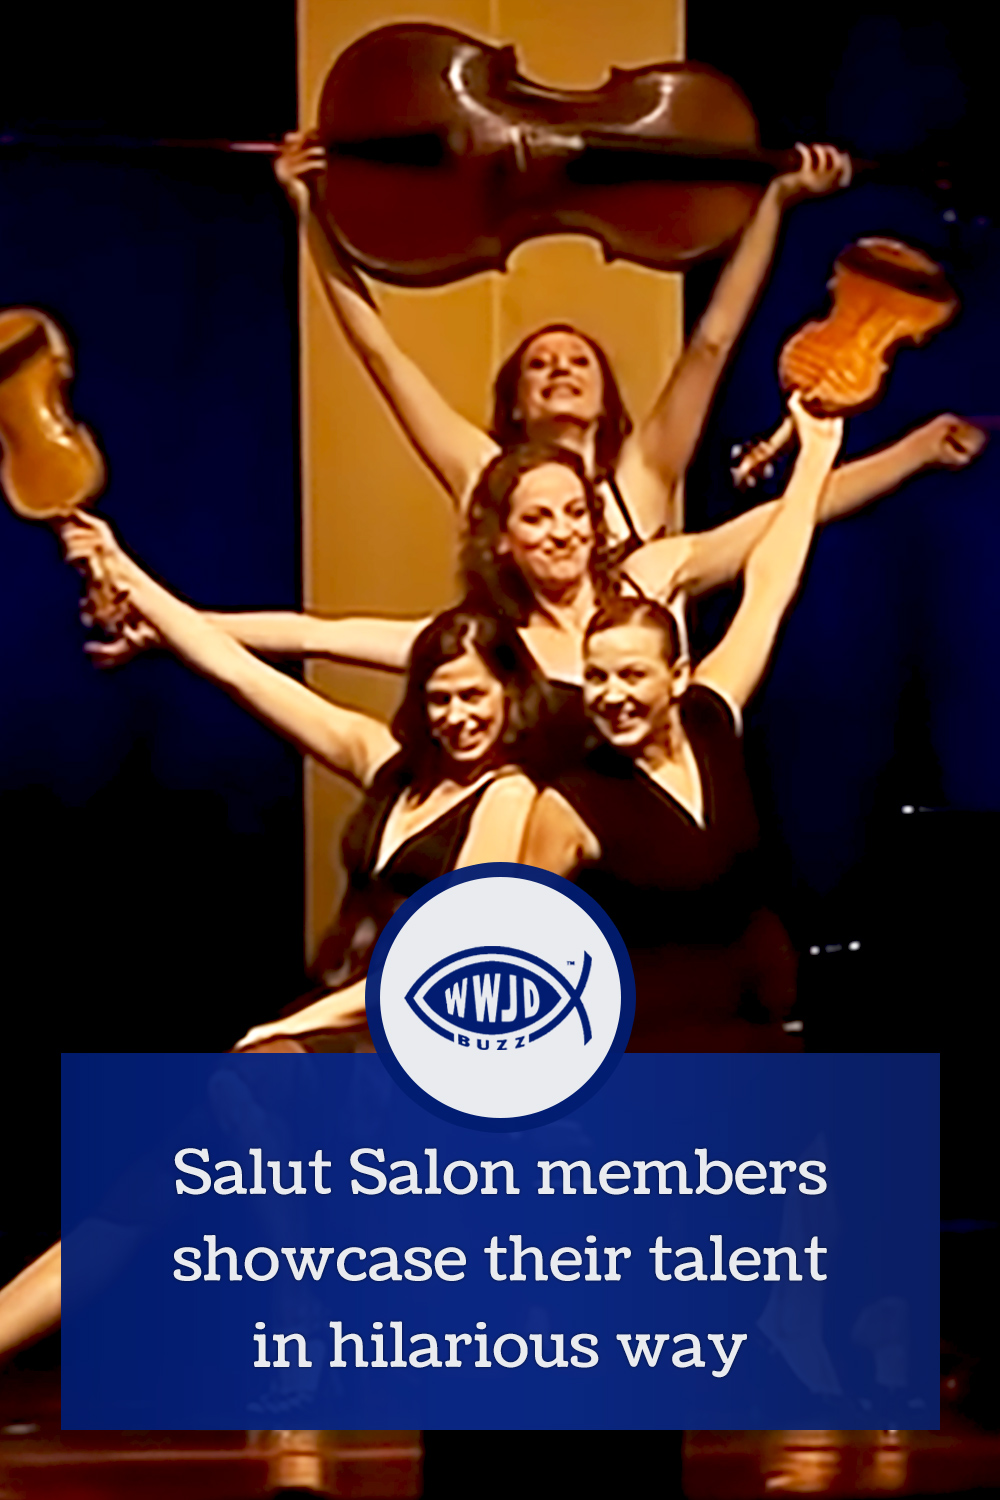 Salut Salon members showcase their talent in hilarious way